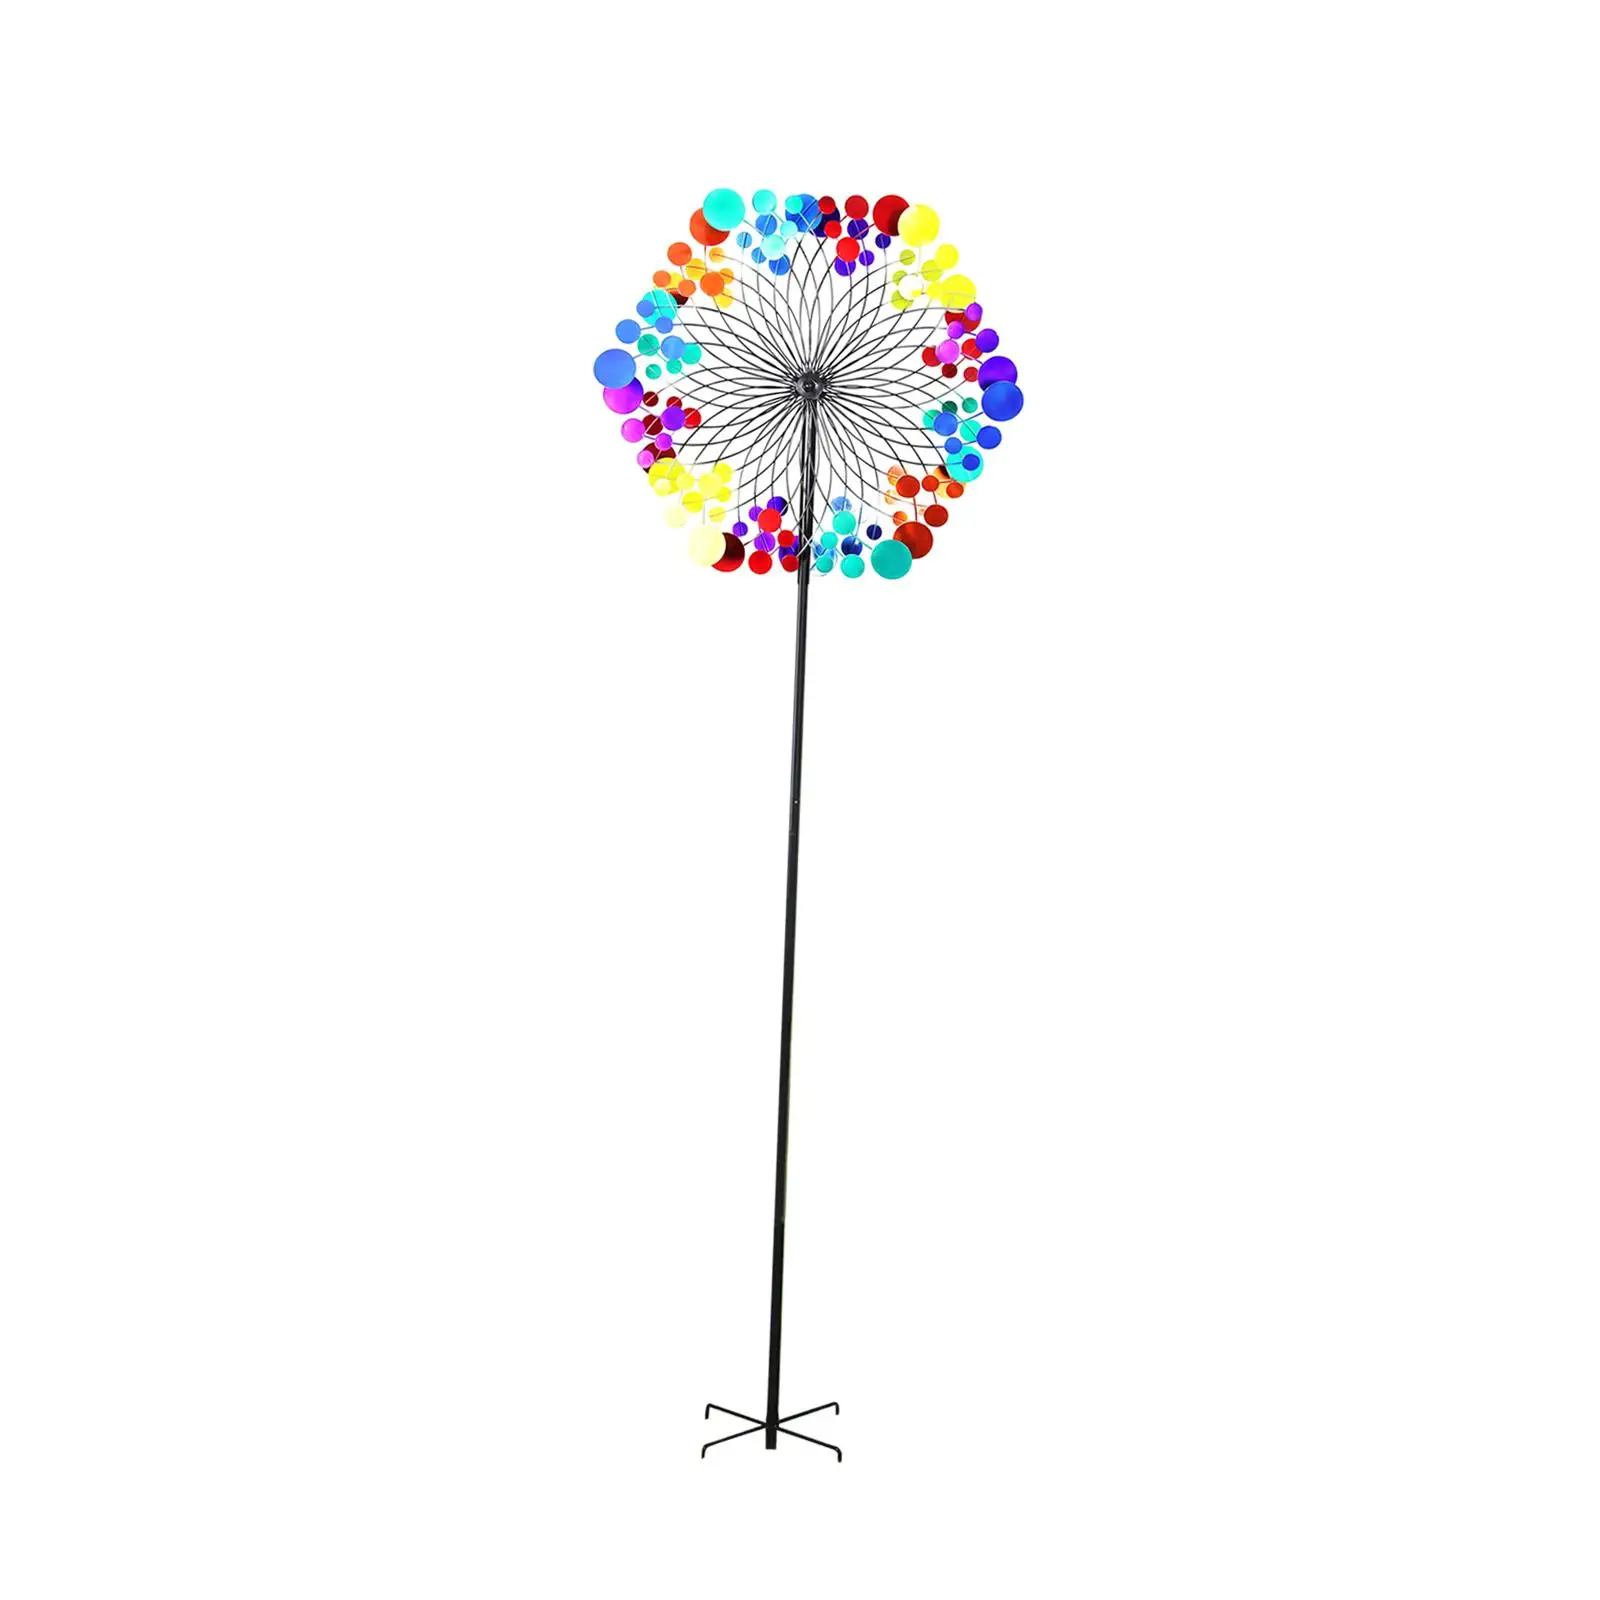 Decor Windmill Crafts Weatherproof Multi Color Metal Decor Windmill for Lawn Yard Garden Decorations Ornament Housewarming Gifts